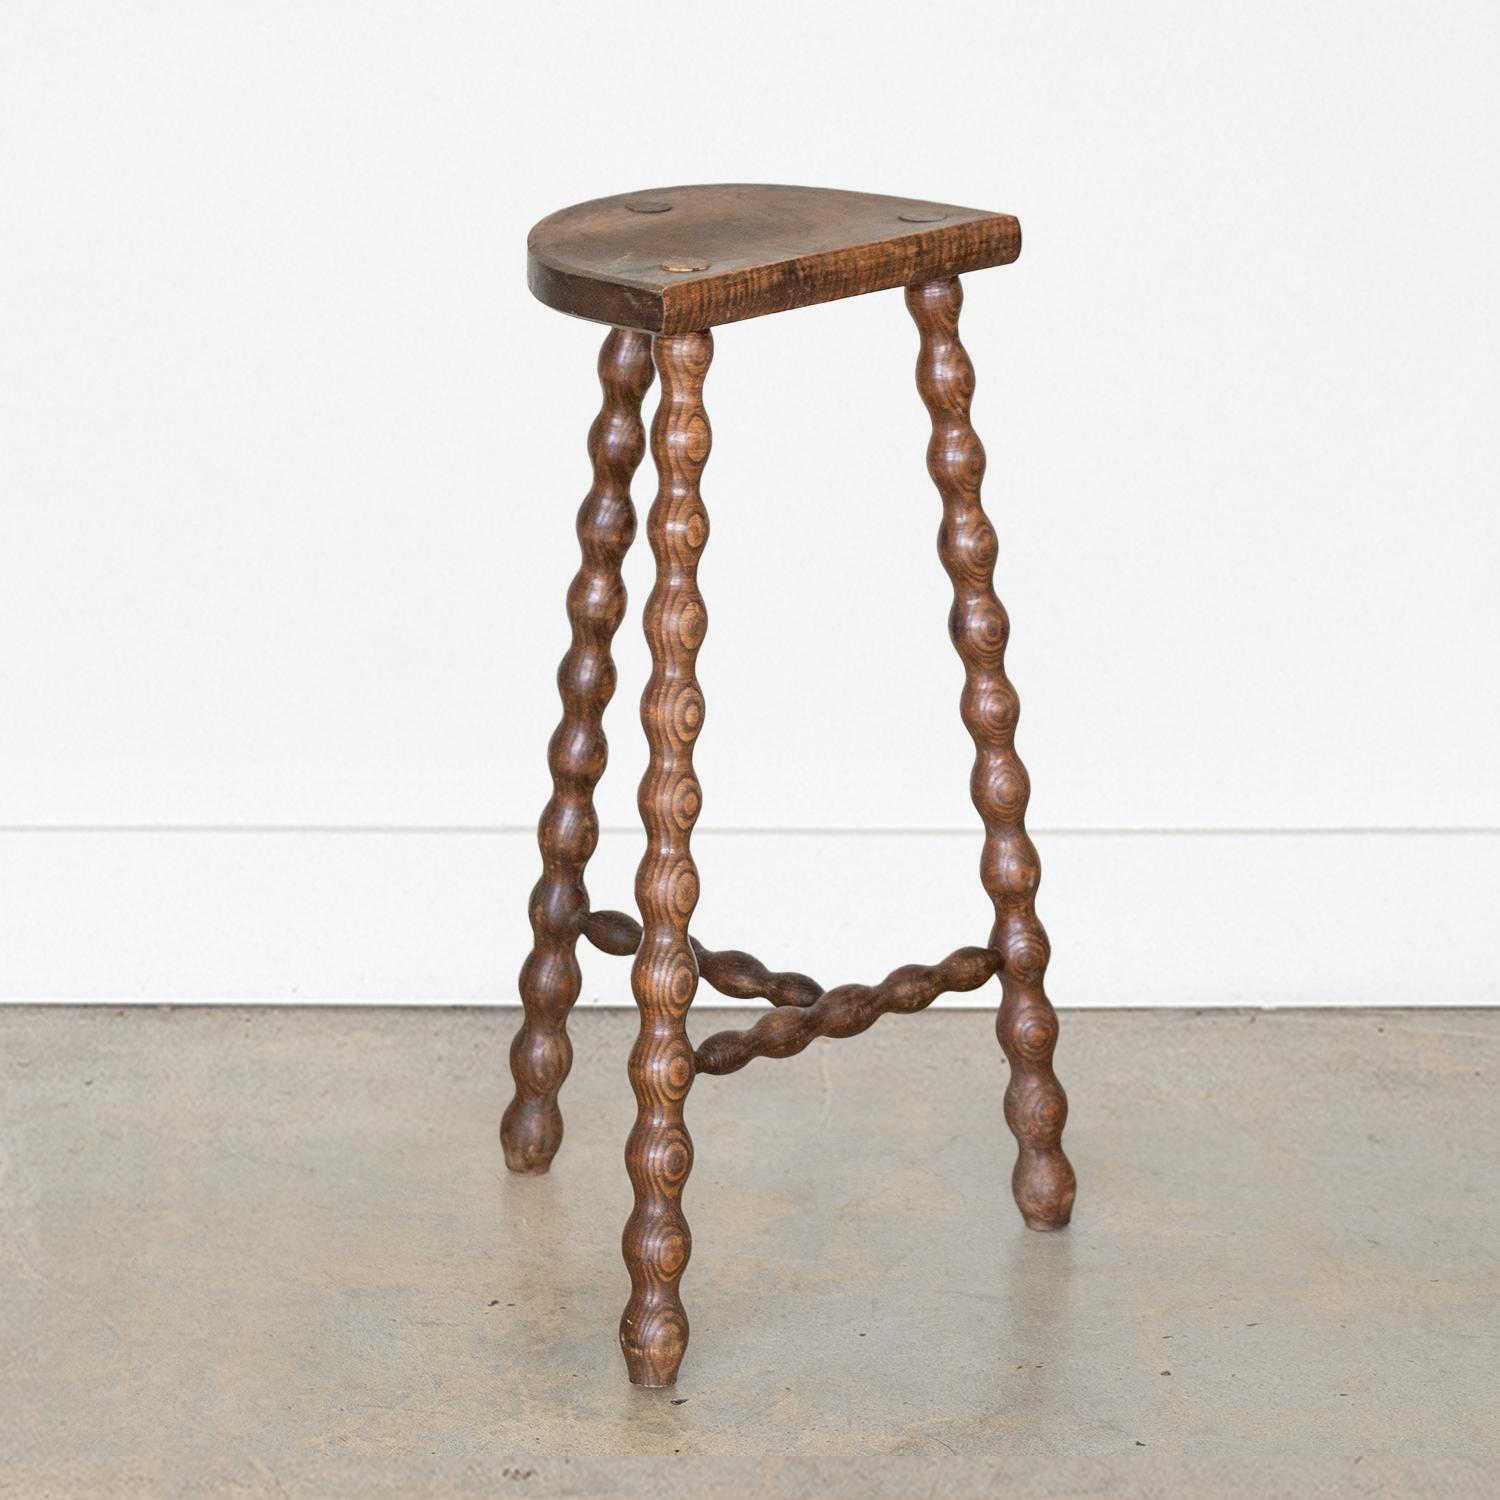 Vintage extra tall wood stool with semi-circle seat and wavy tripod legs from France. Original wood finish with great age markings and patina. Can be used as a stool or as side table. 



